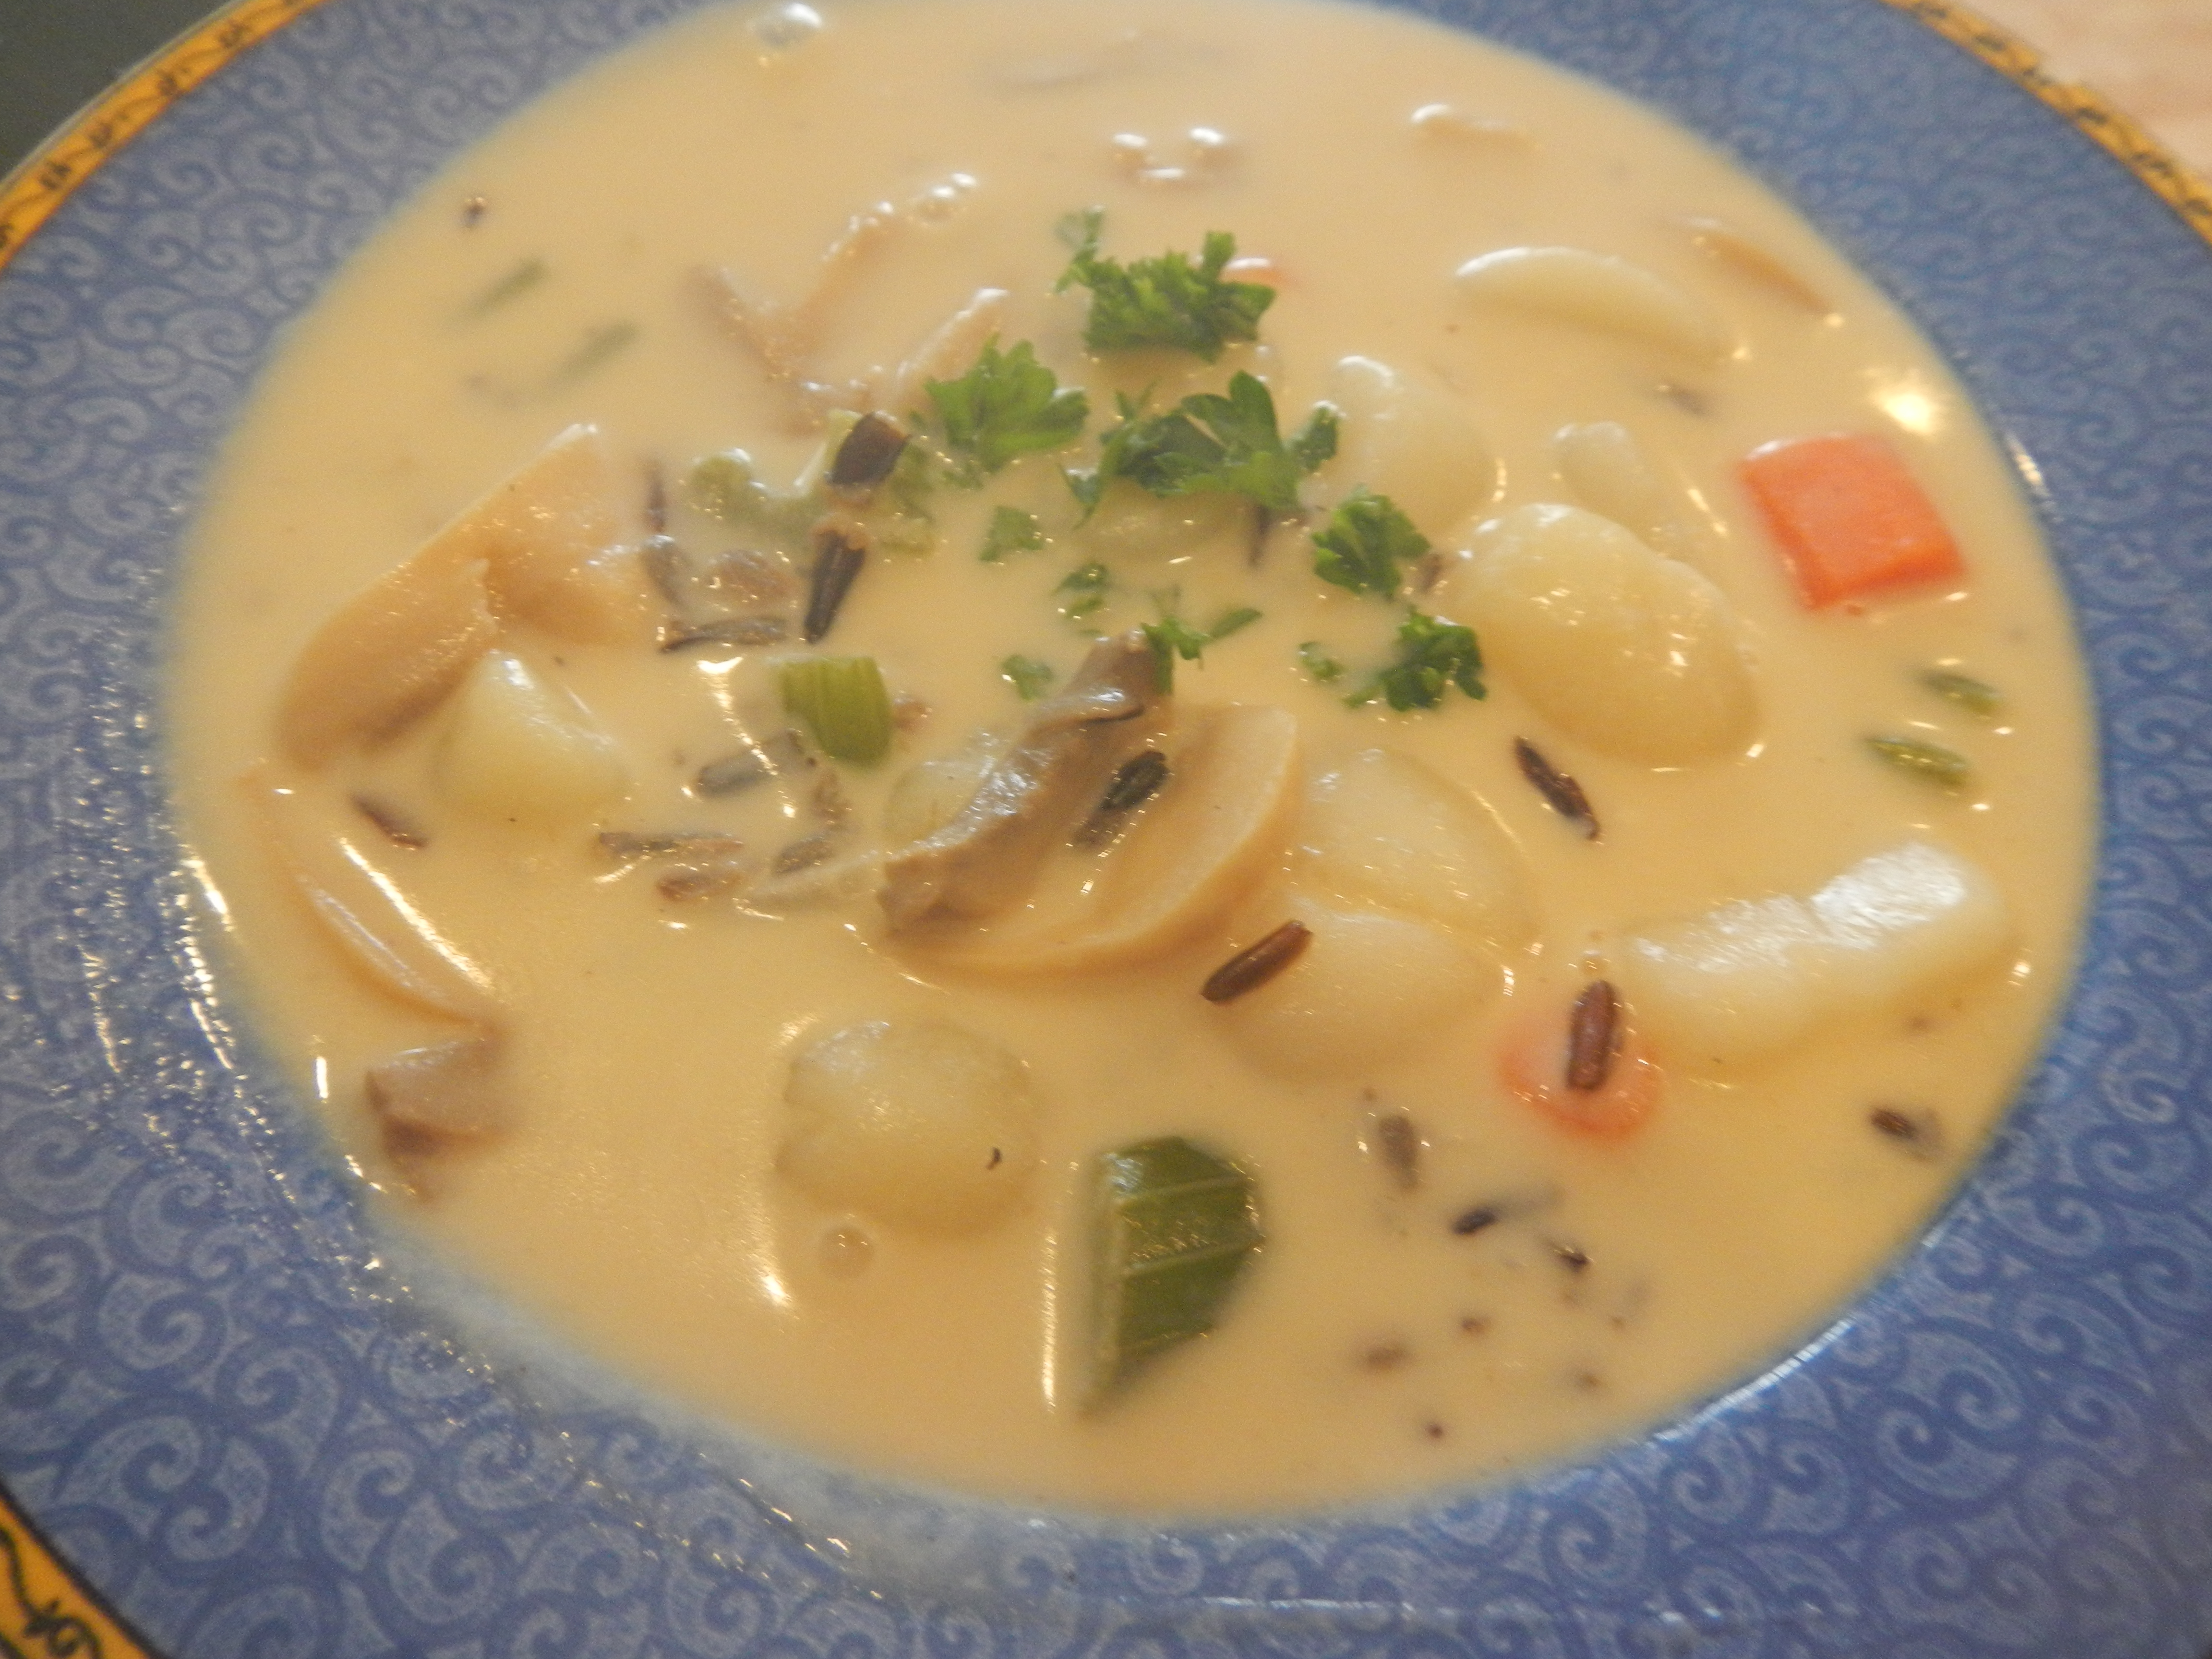 Image shows bowl of creamy wild rice soup.